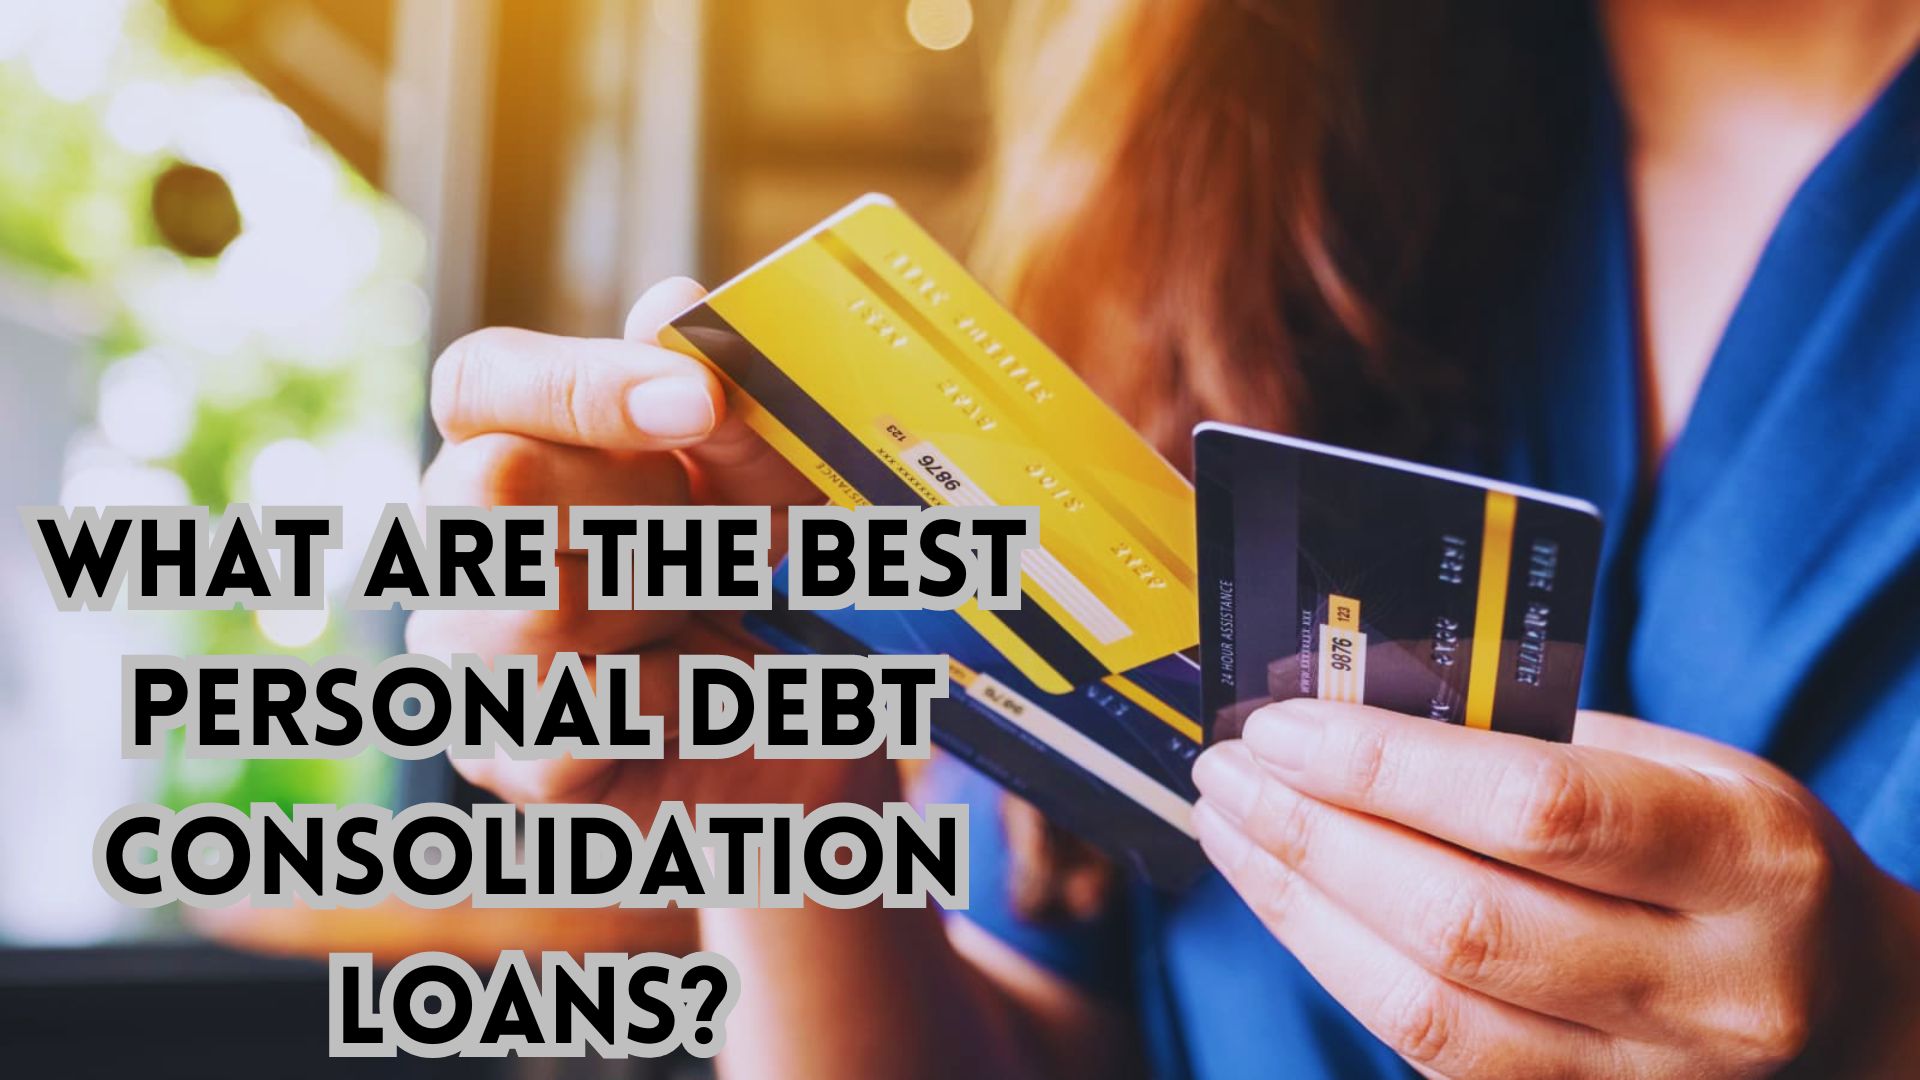 What Are the Best Personal Debt Consolidation Loans.